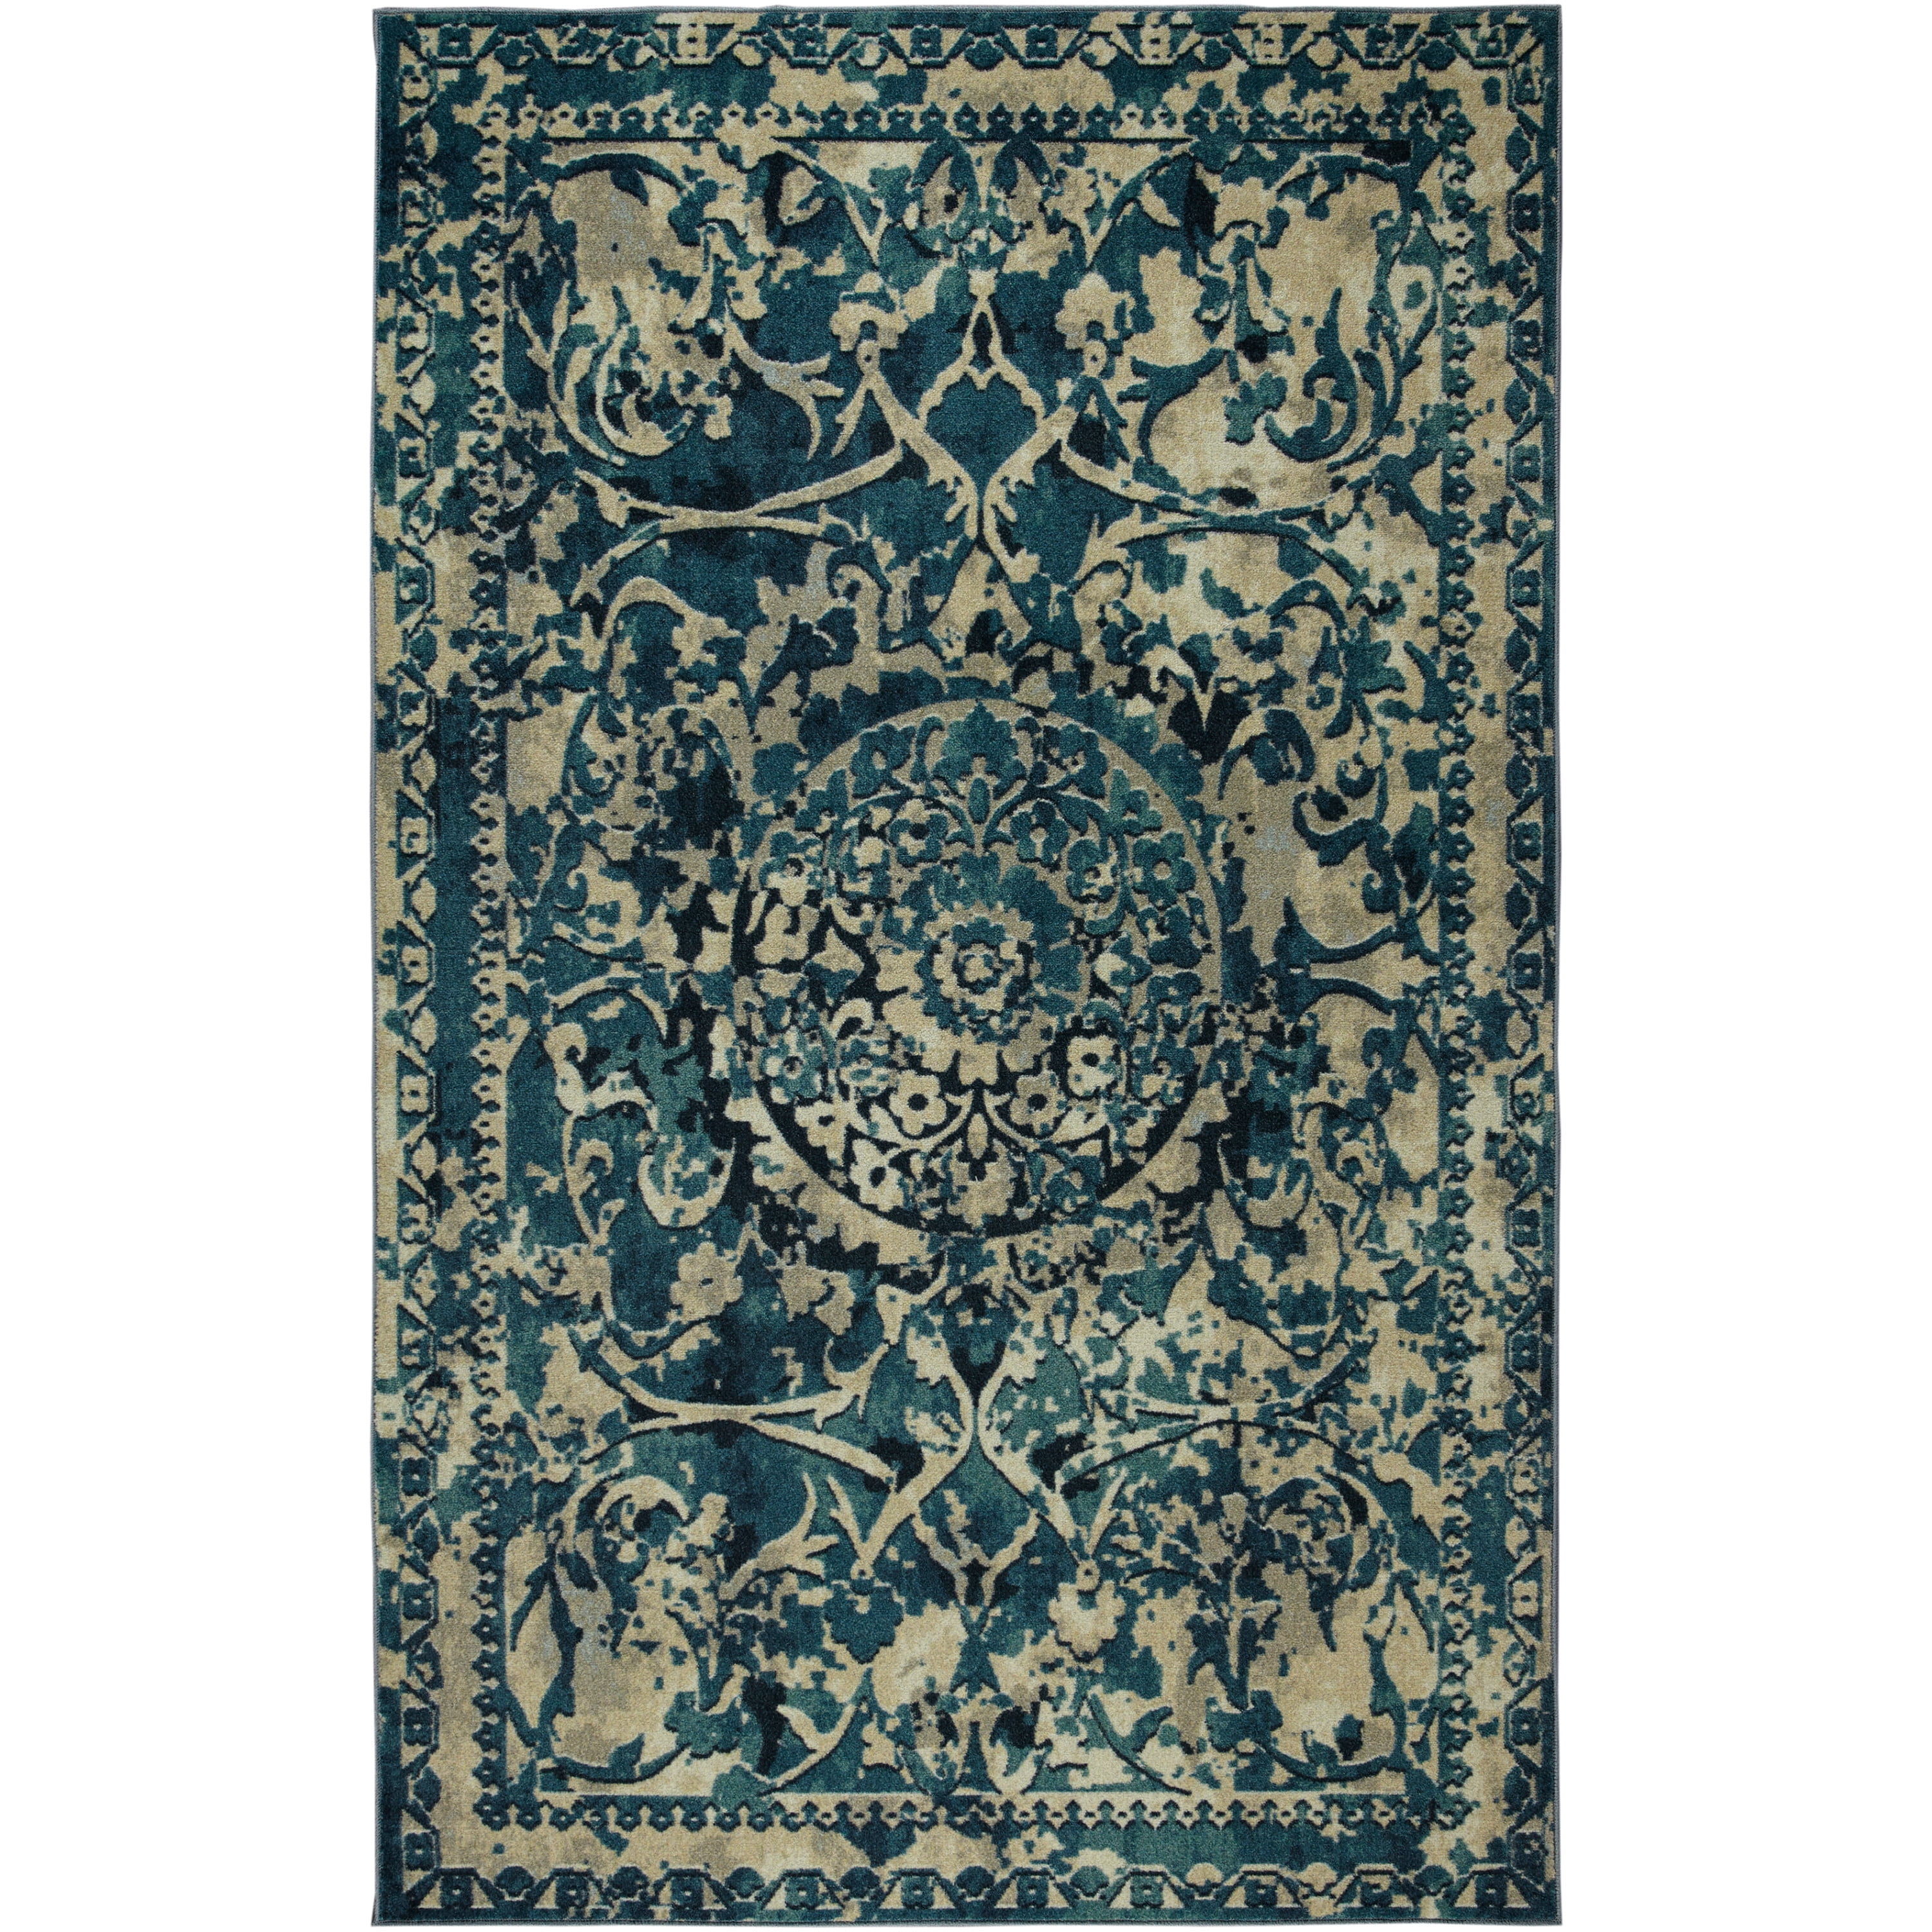 Artistic Weavers Evangelina Blue and Charcoal Transitional 7'10 x 10'3 Area Rug 